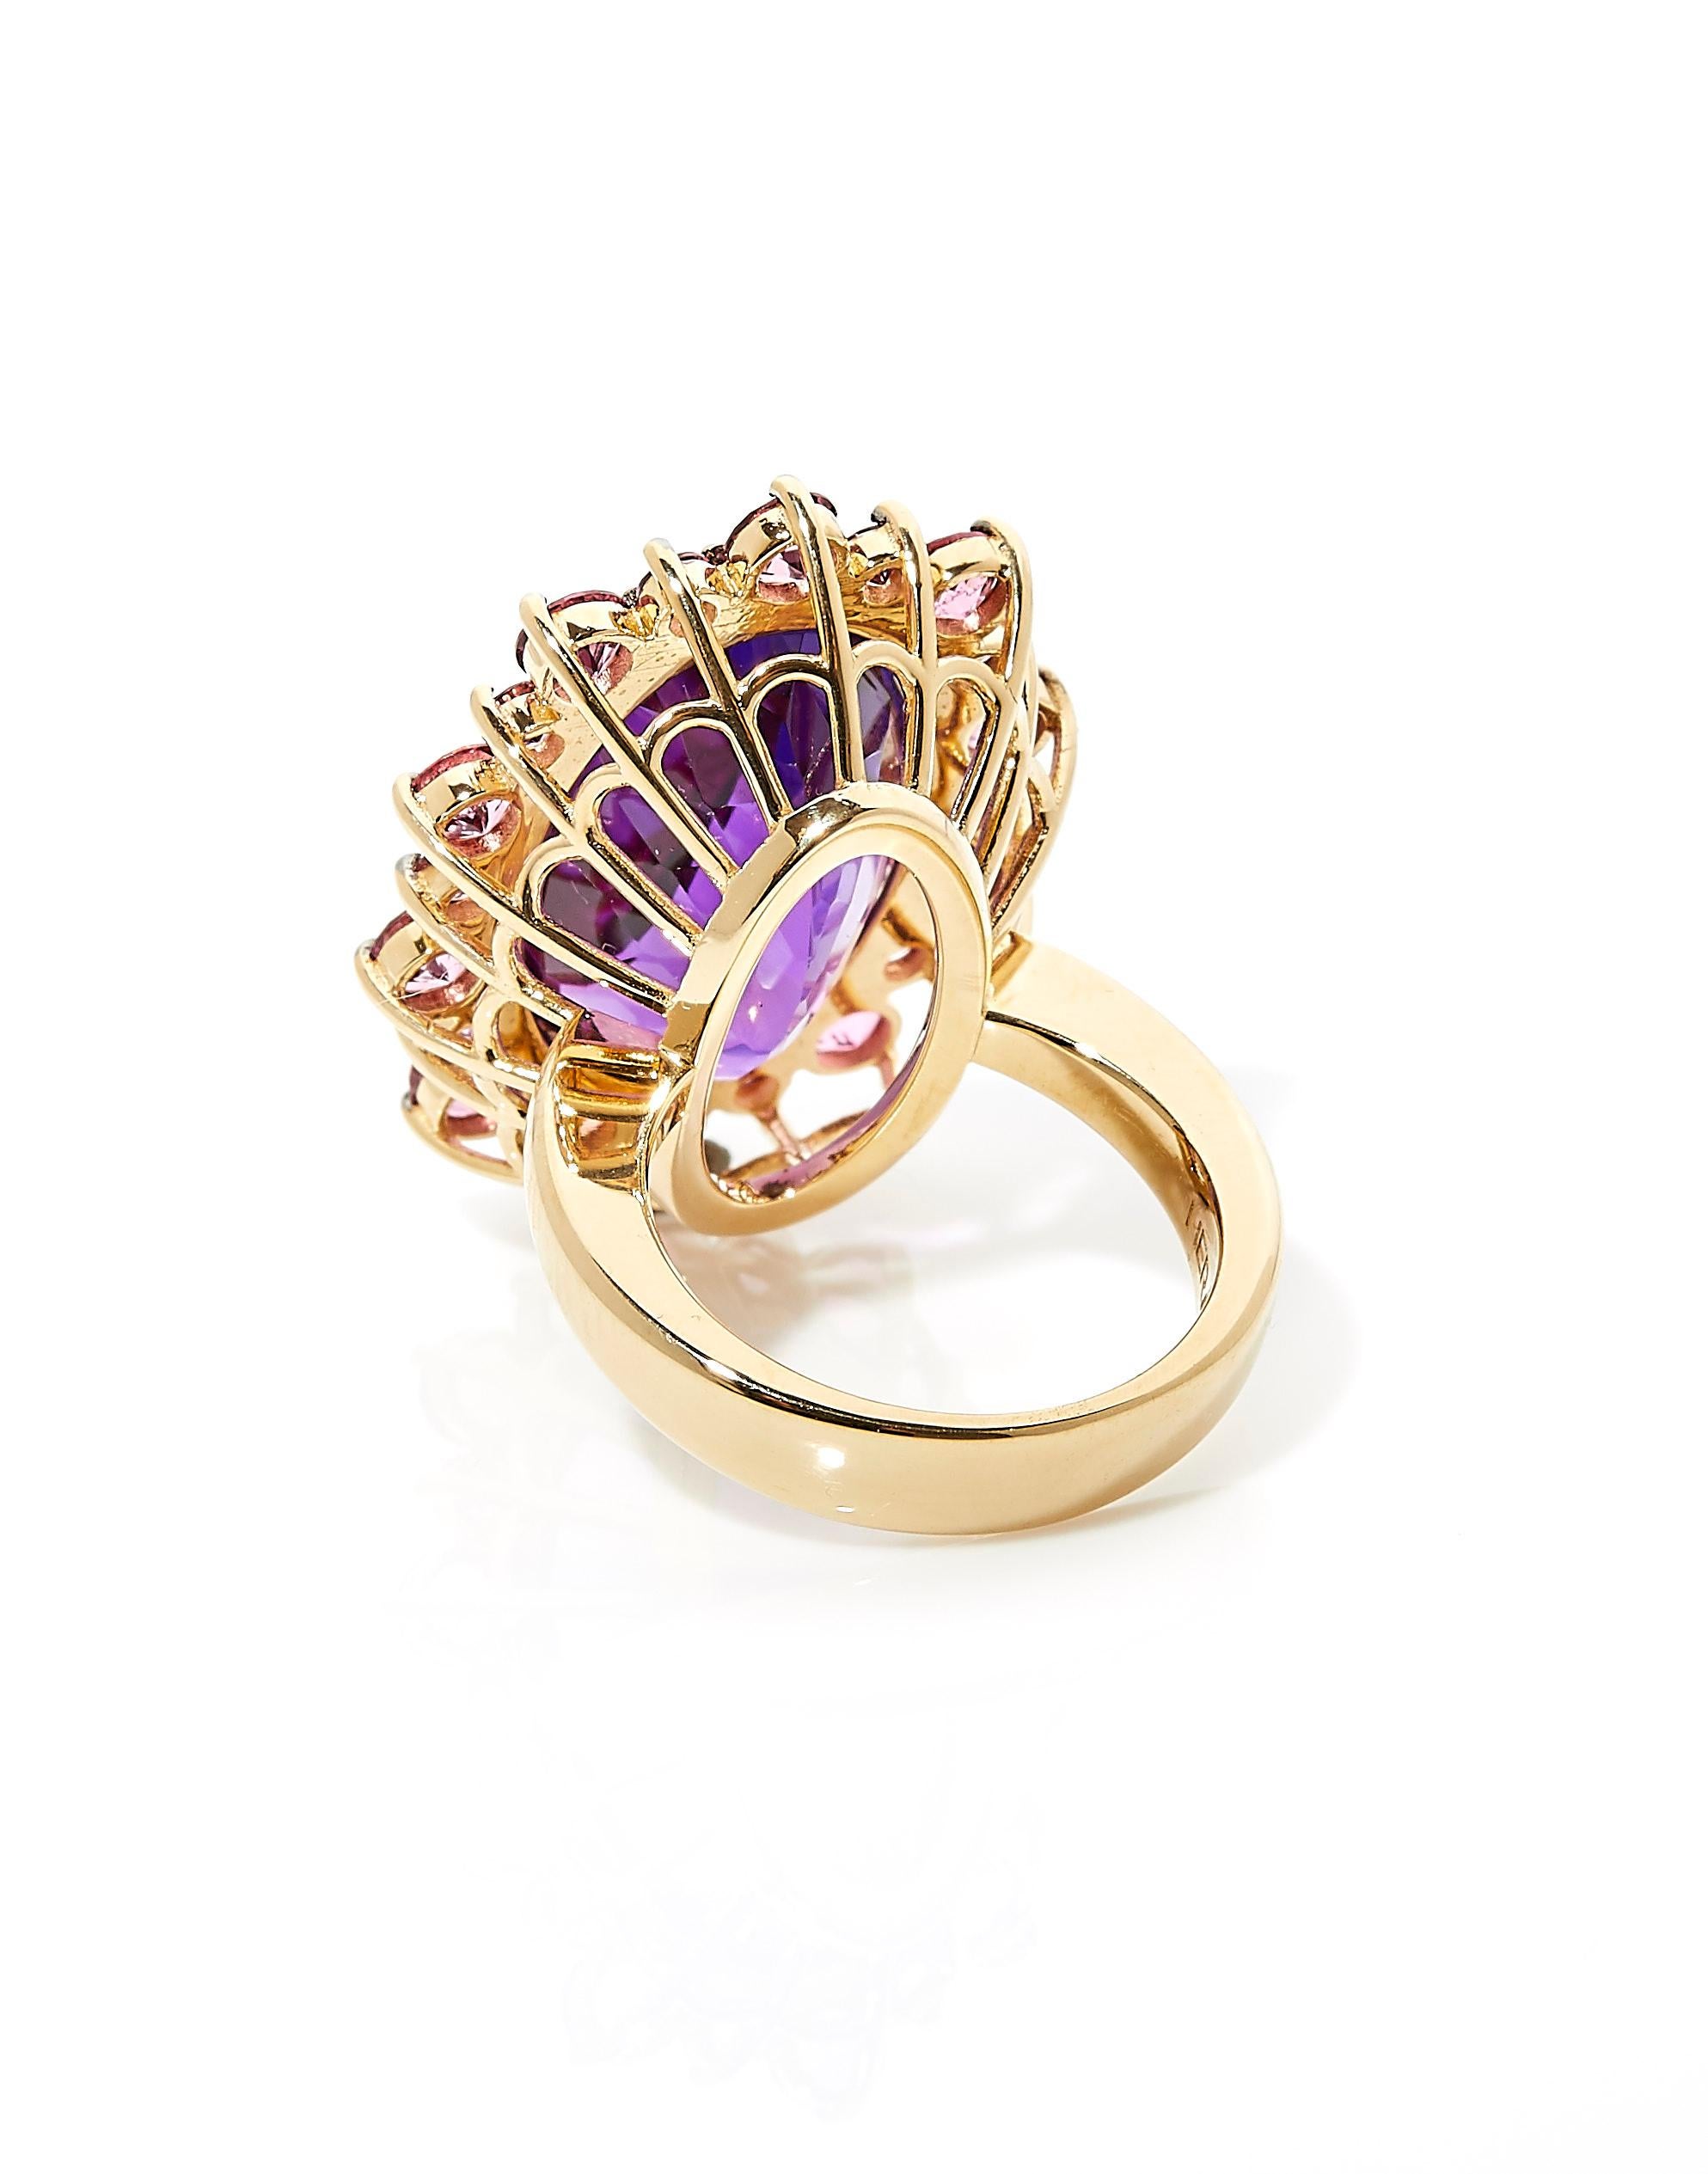 Contemporary 18 Karat Yellow Gold Cocktail Ring Set with 15.73 Carat Amethyst and Spinels For Sale